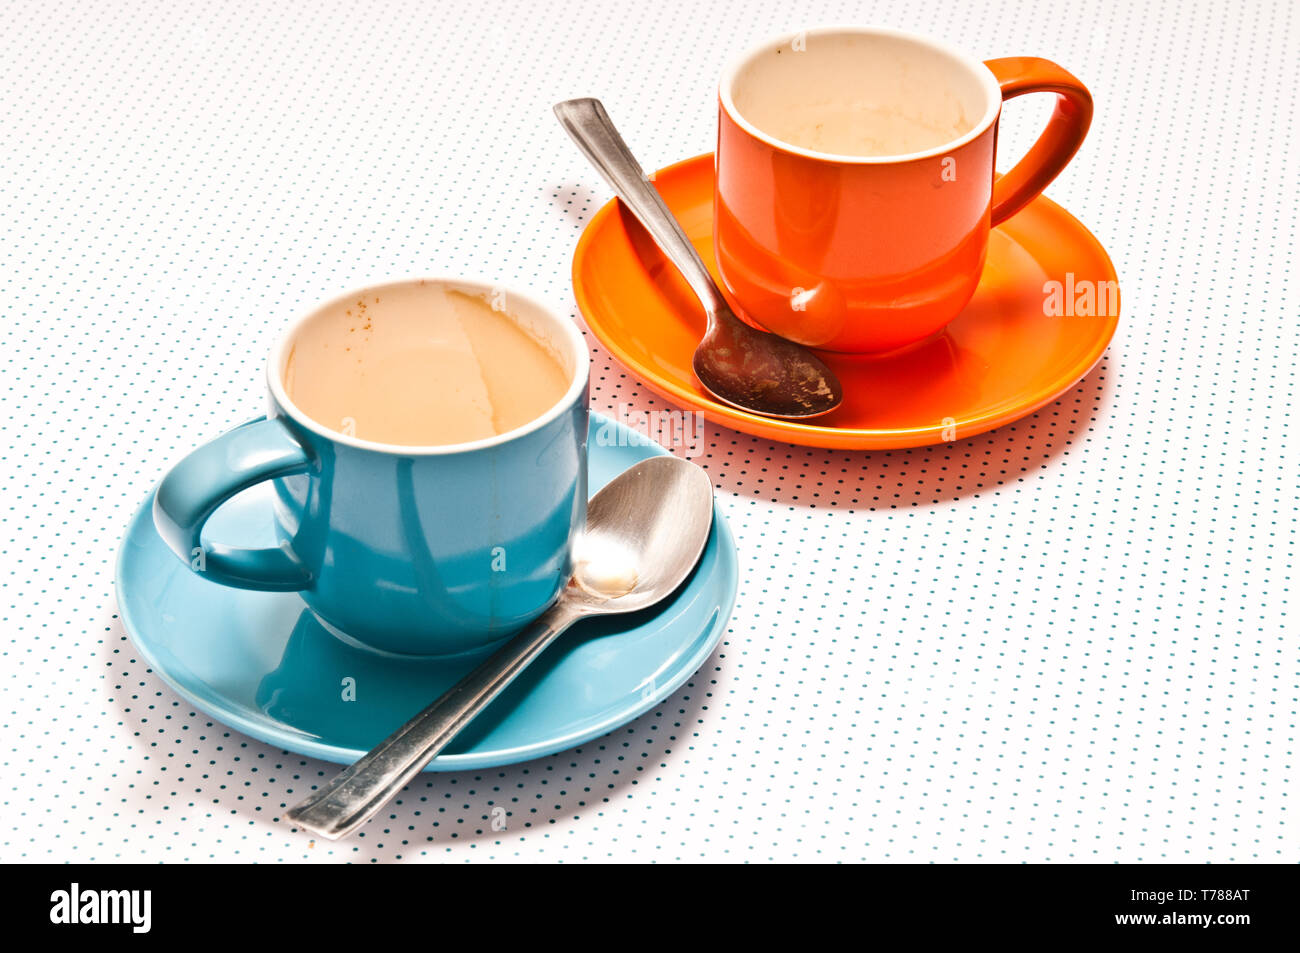 https://c8.alamy.com/comp/T788AT/orange-and-blue-coffee-cups-empty-after-drinking-an-espresso-T788AT.jpg